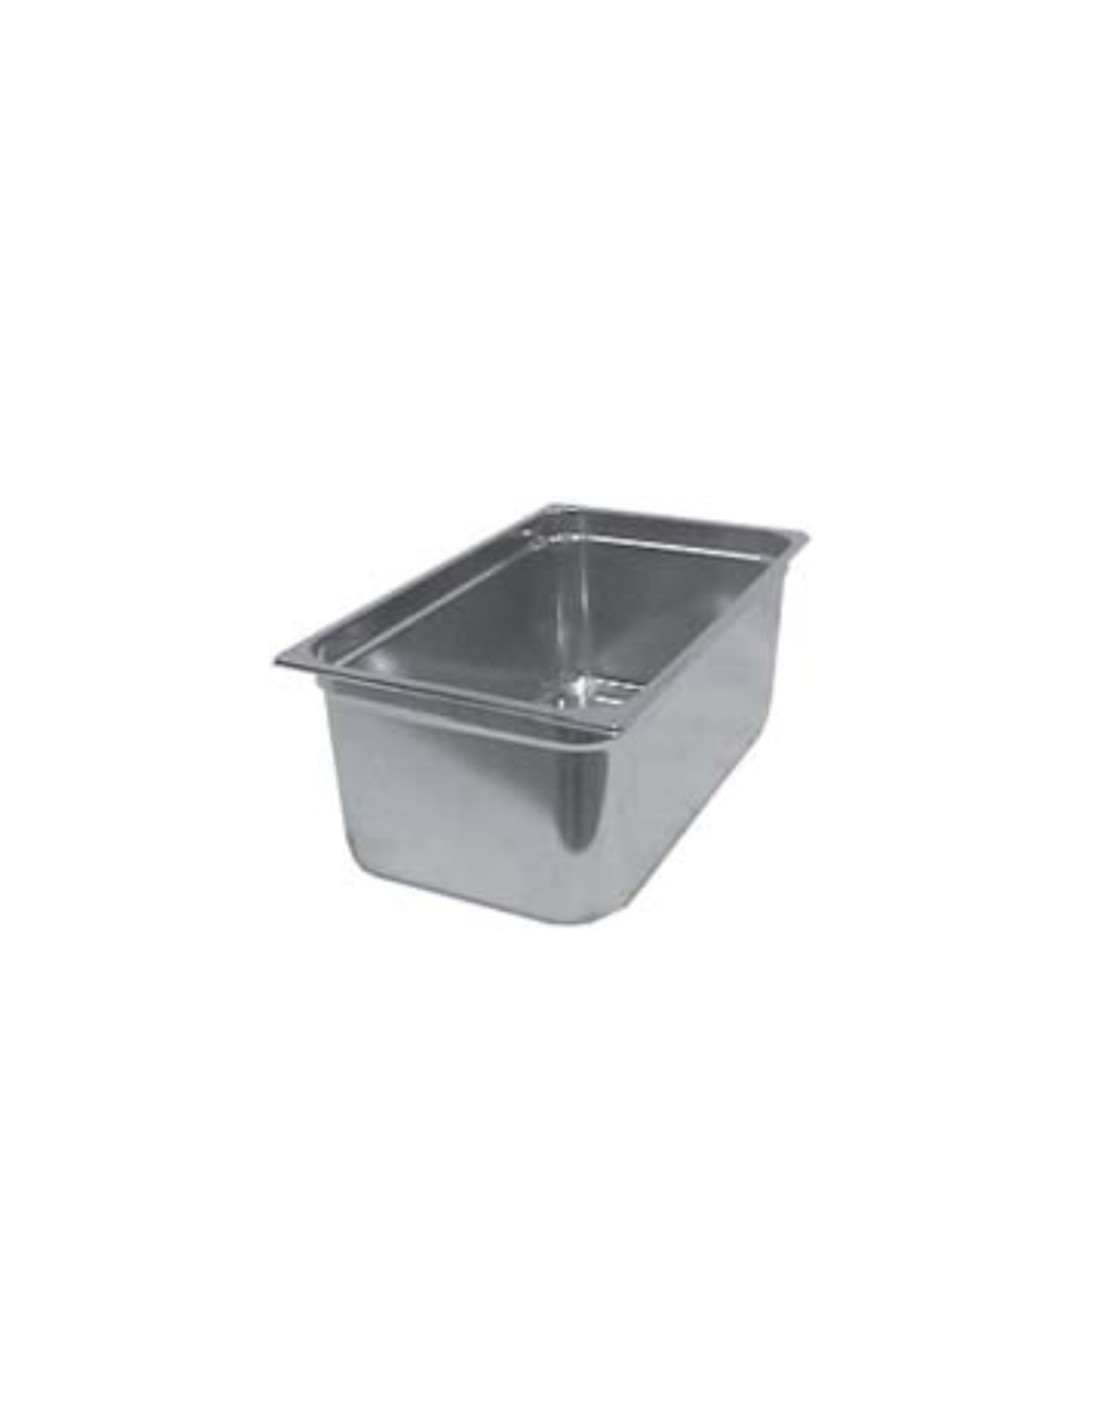 Stainless steel containers for bain-marie - Tank capacity l 13 GN 2/3 - Dimensions 35.5 x 32.5 x 15 cm